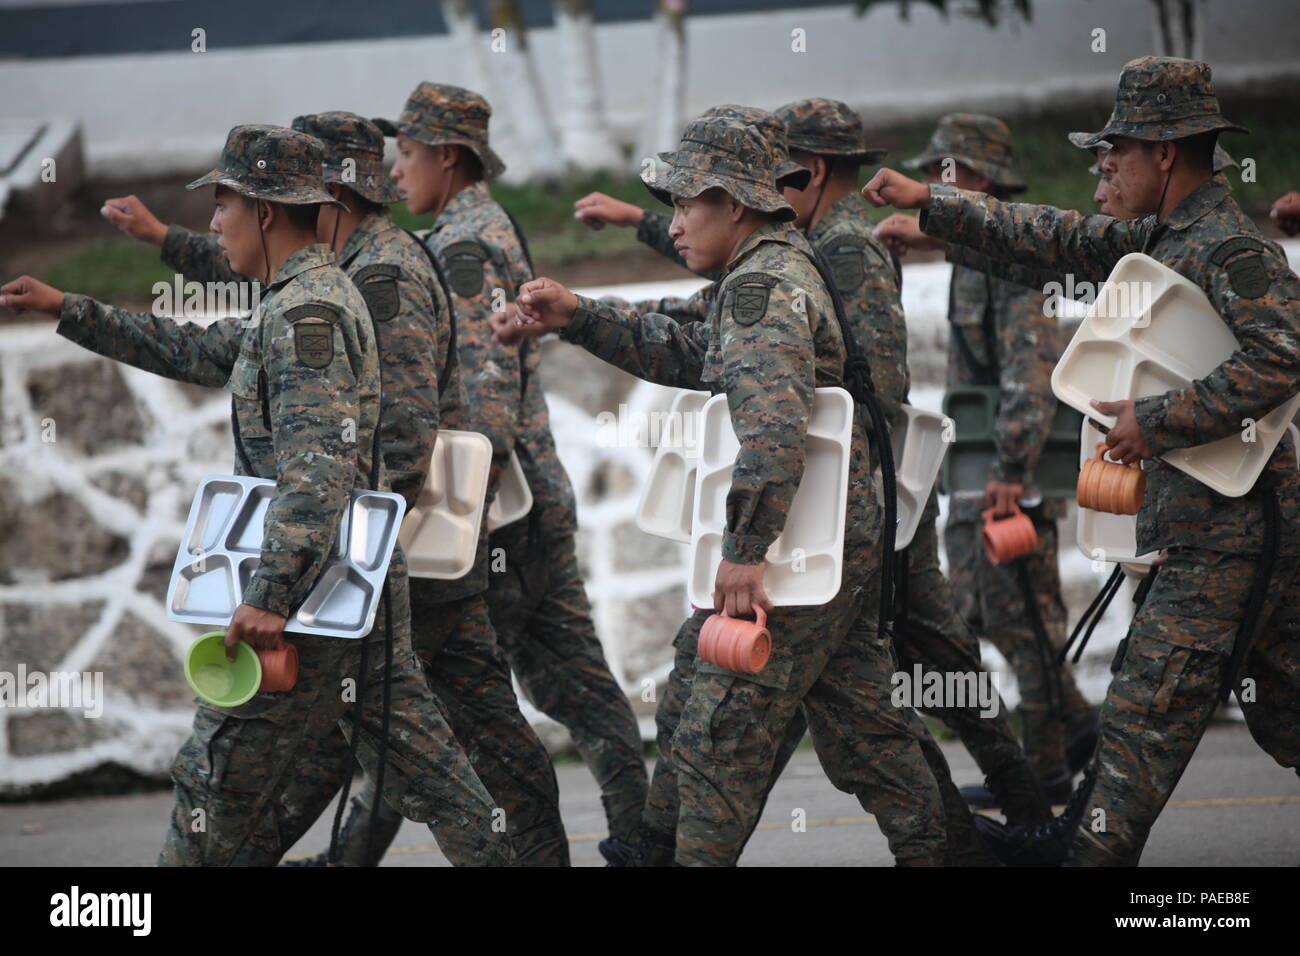 Guatemalan army recruits march after dinner at the basic training base that also serves as a holding base for Operation Beyond The Horizon at  Guatemala City, Guatemala, March 26, 2016. Beyond The Horizon is an annual humanitarian mission held in different South American Countries, where U.S. service members build schools and provide free medical access to the local population. (U.S. Army photo by Sgt. Prosper Ndow) Stock Photo